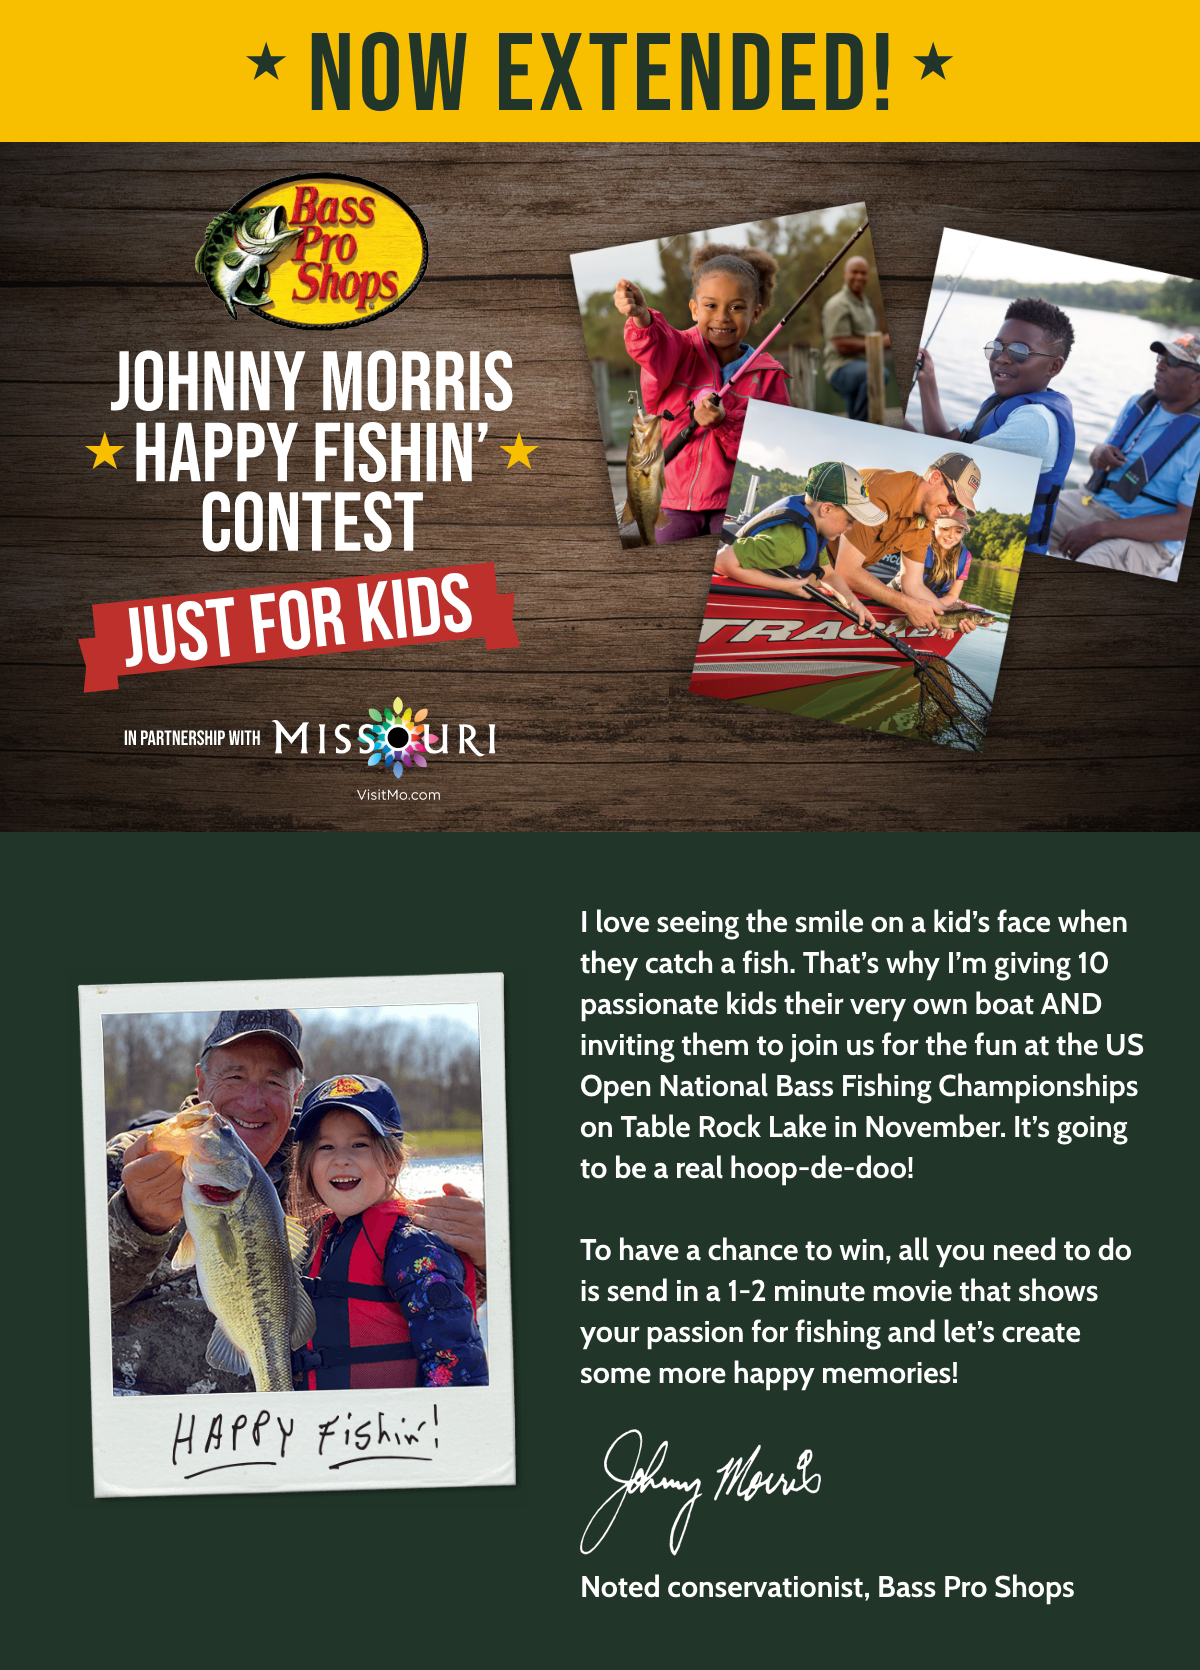 Bass Pro Shops: Johnny Morris Happy Fishin' Contest Extended